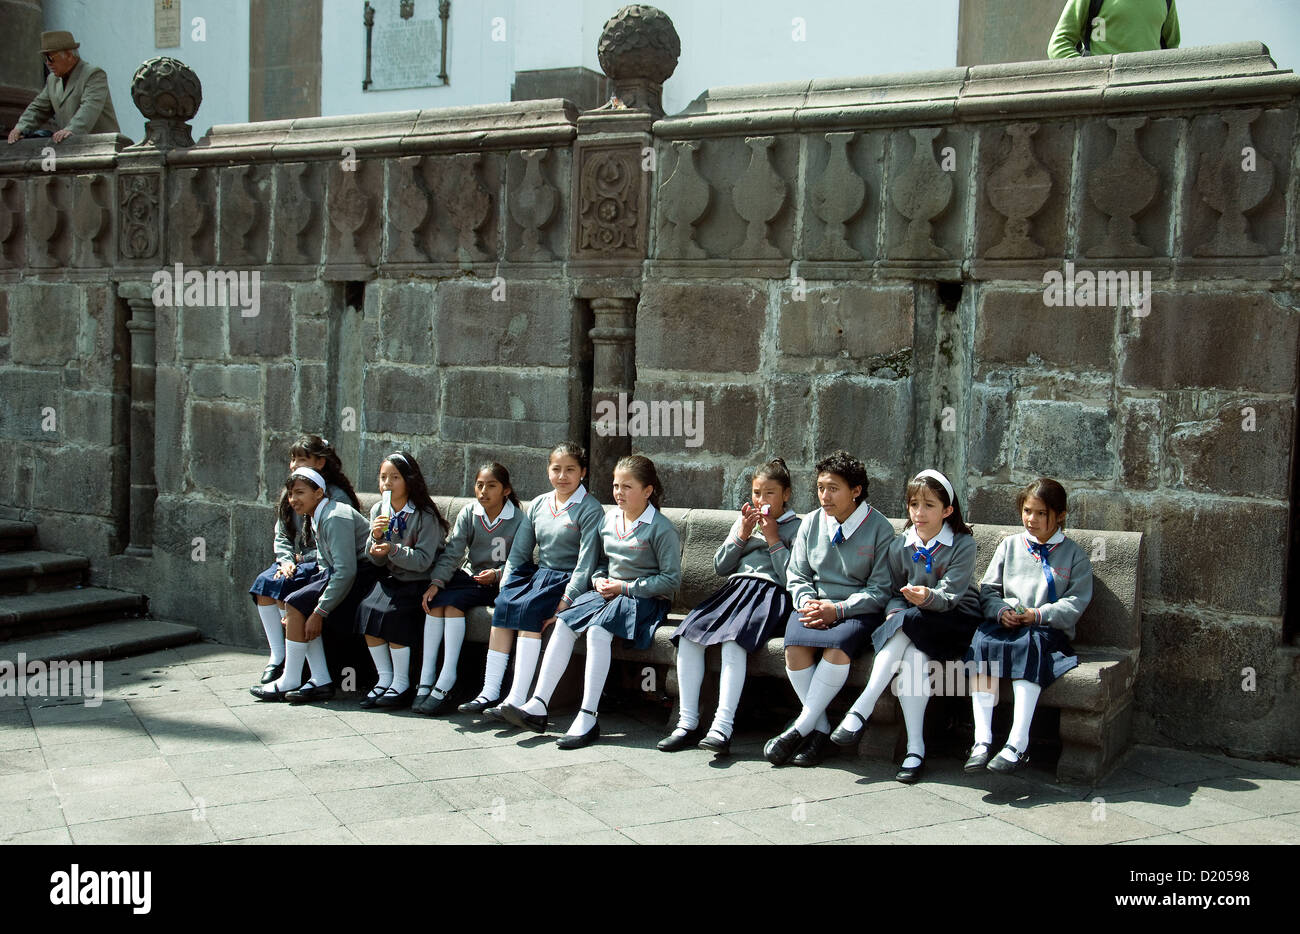 Smartly uniformed schoolgirls sitting on a bencn in the Plaza de la Independencia Quito Stock Photo